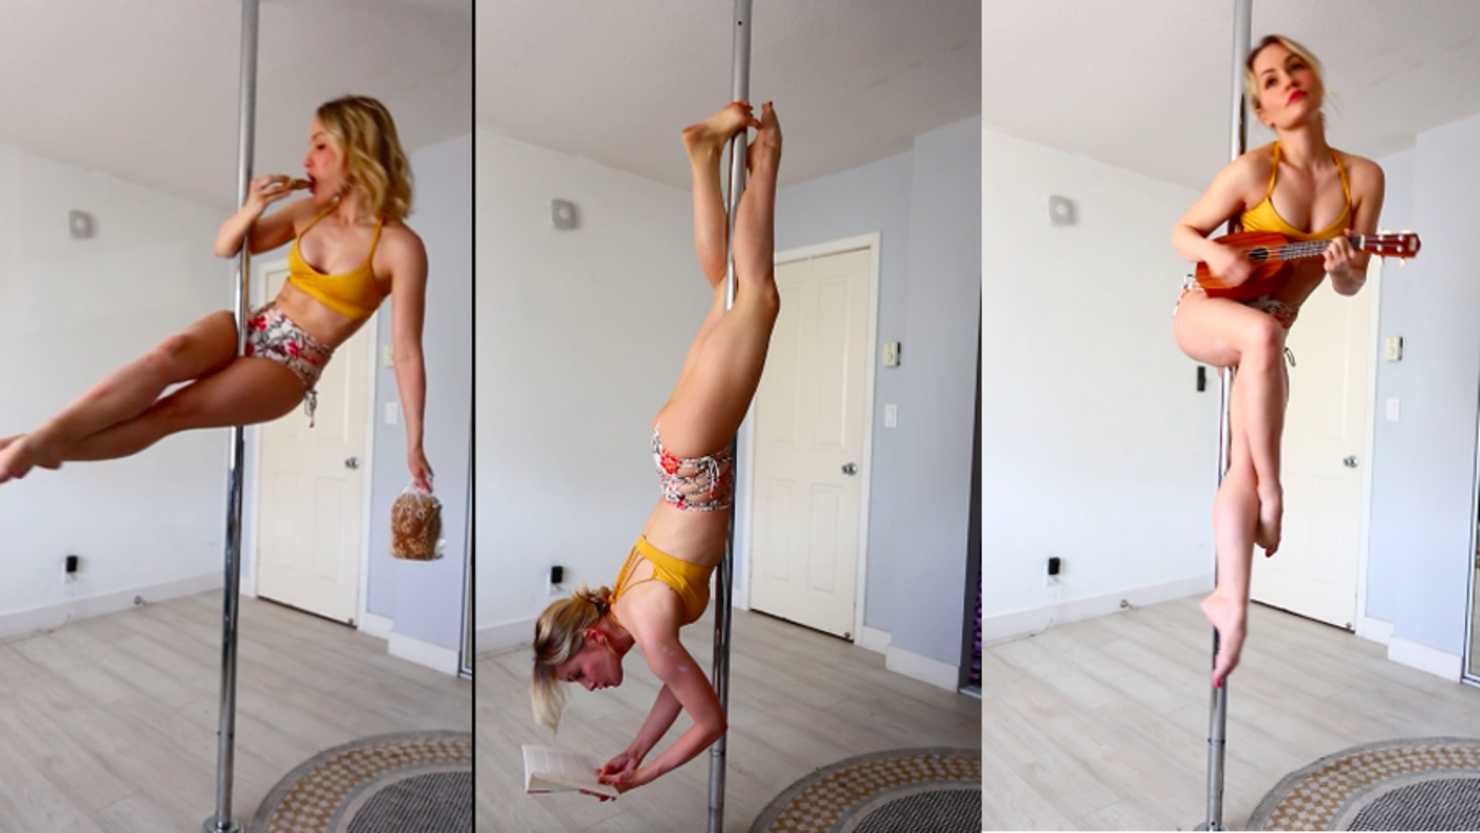 Pole dancing being used for fitness